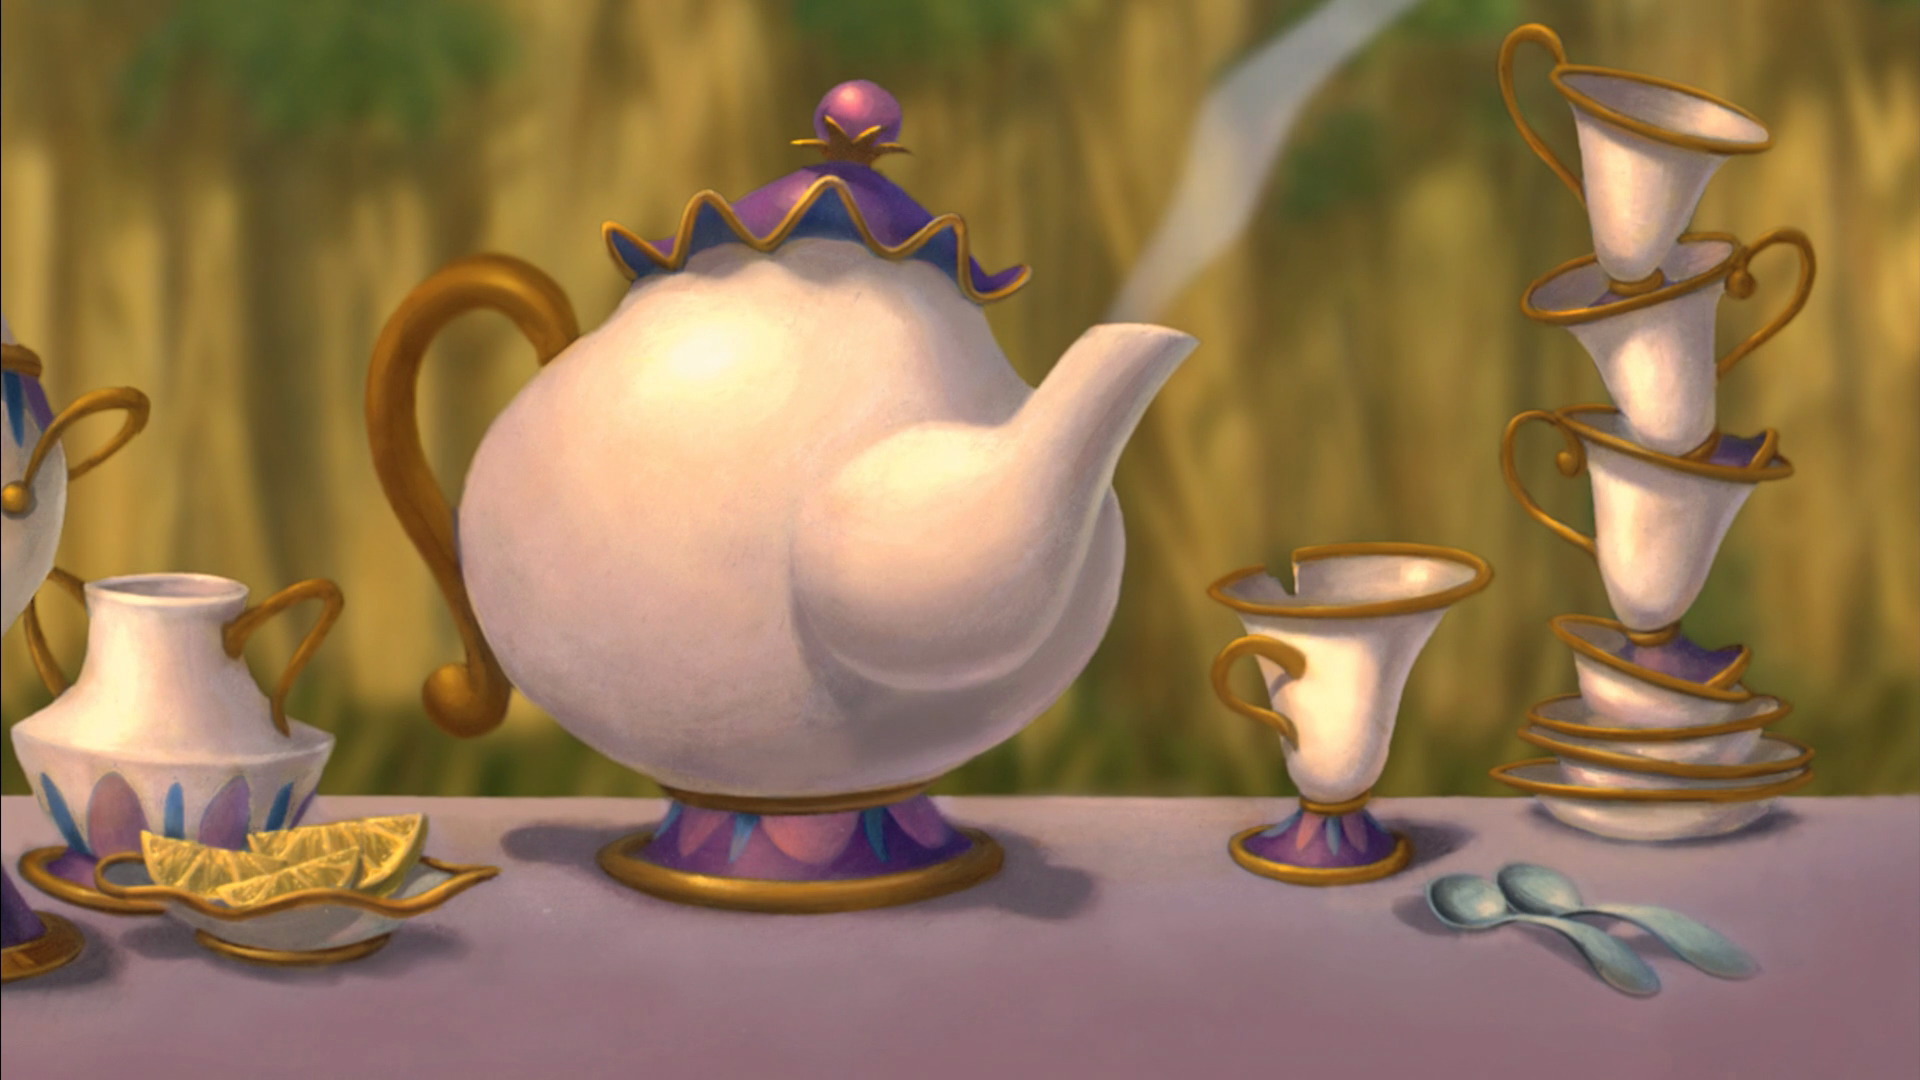 Disney Beauty and the Beast Mrs. Potts Teapot Set With 2 Chip Cups